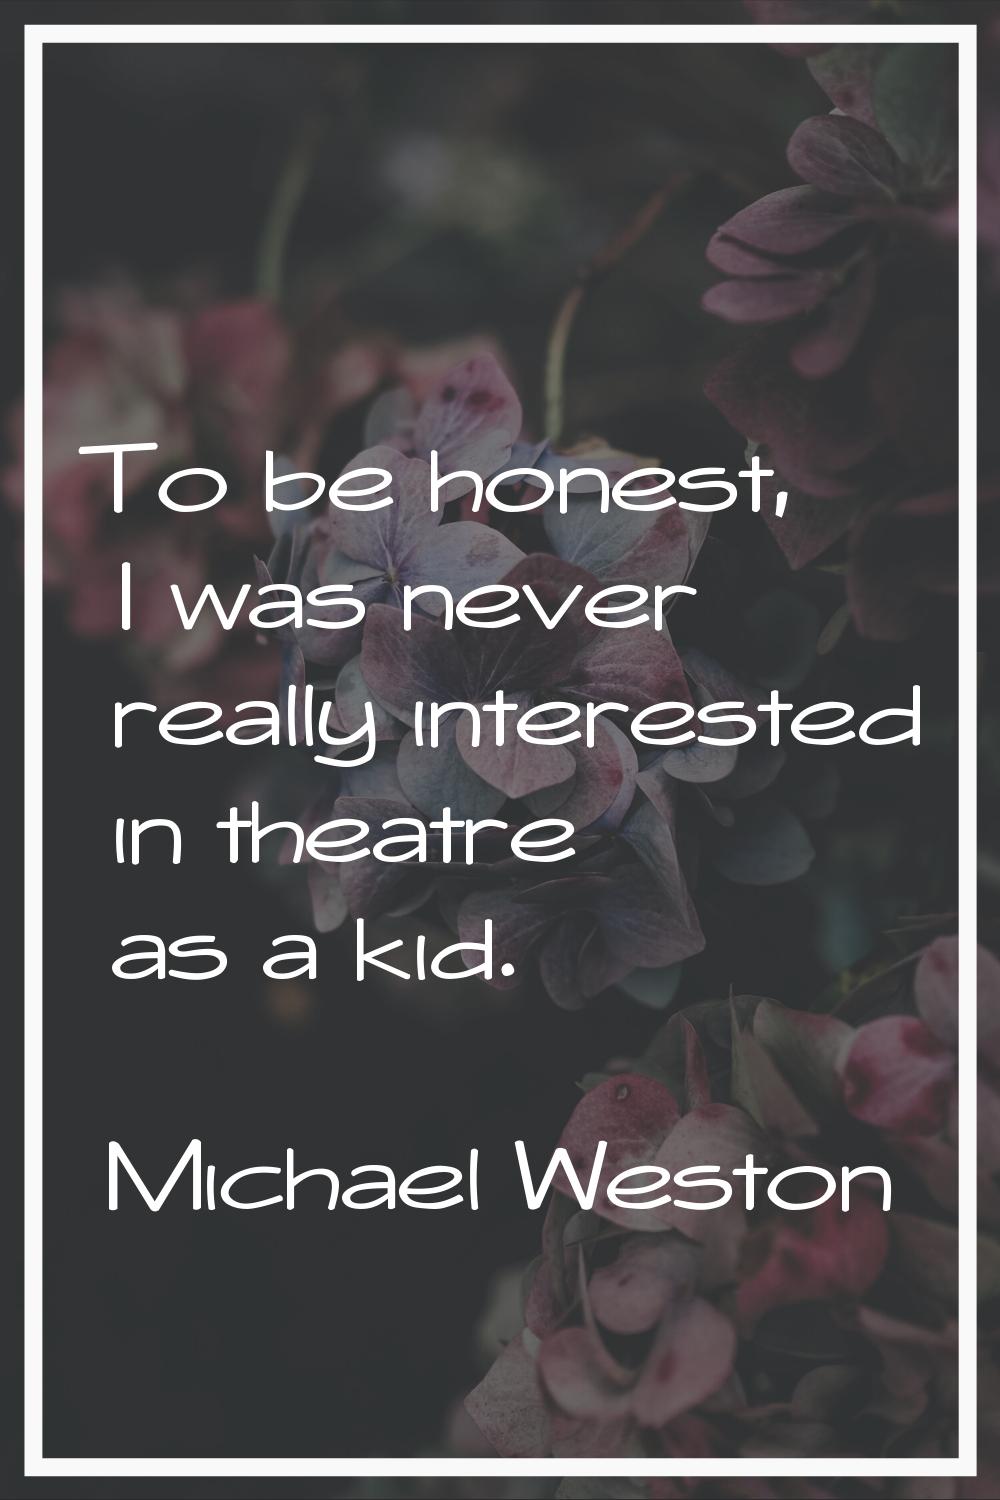 To be honest, I was never really interested in theatre as a kid.